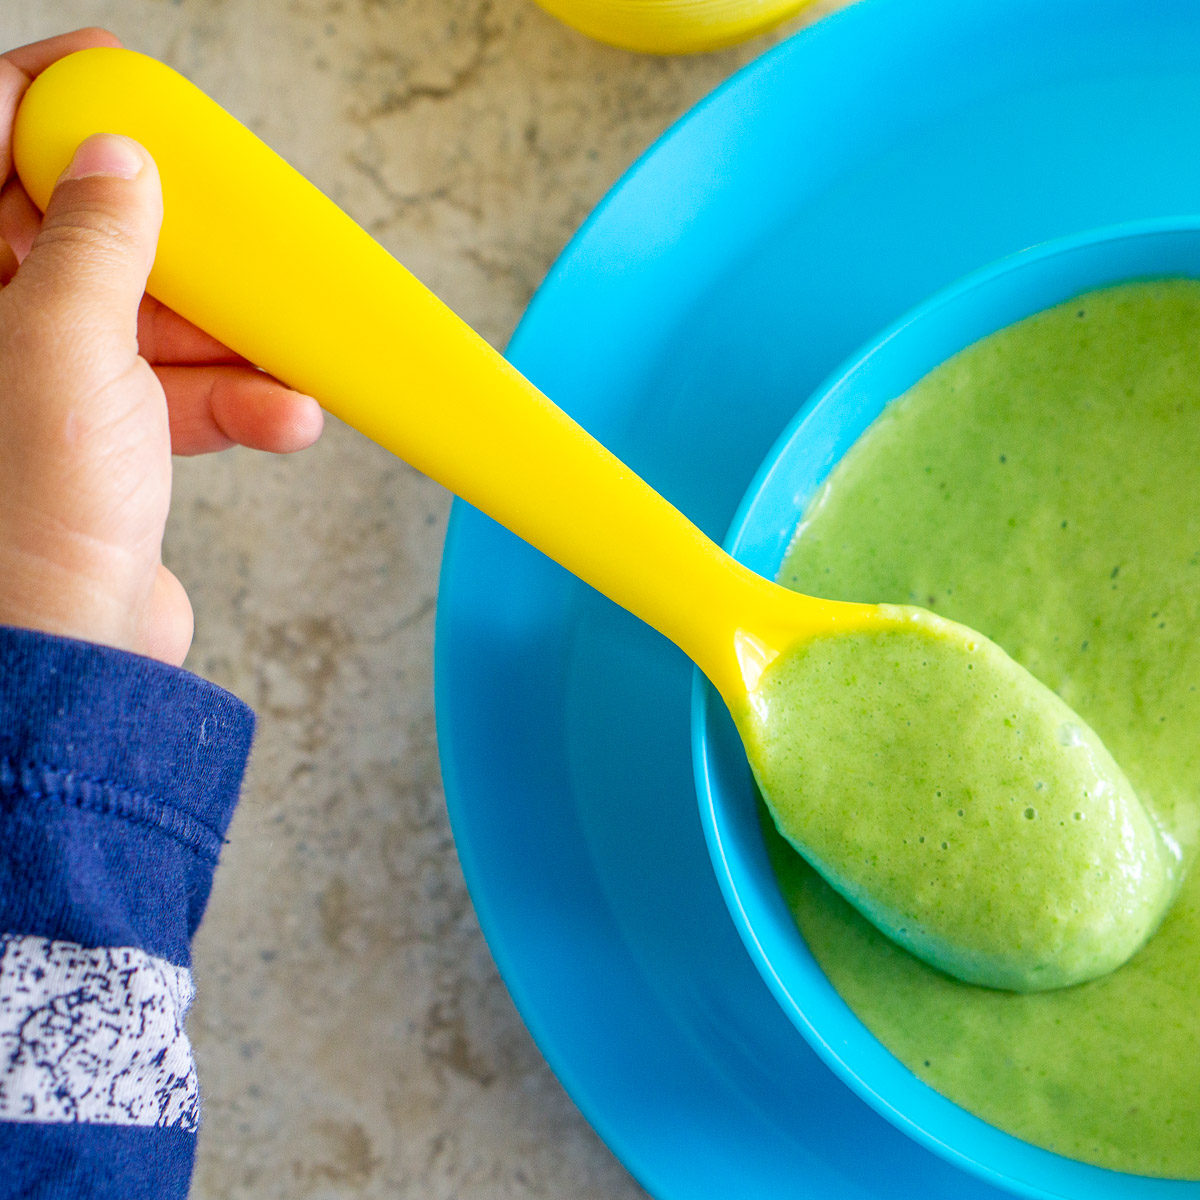 Toddler Meals and Baby Food Recipes You Can Make in the Blender